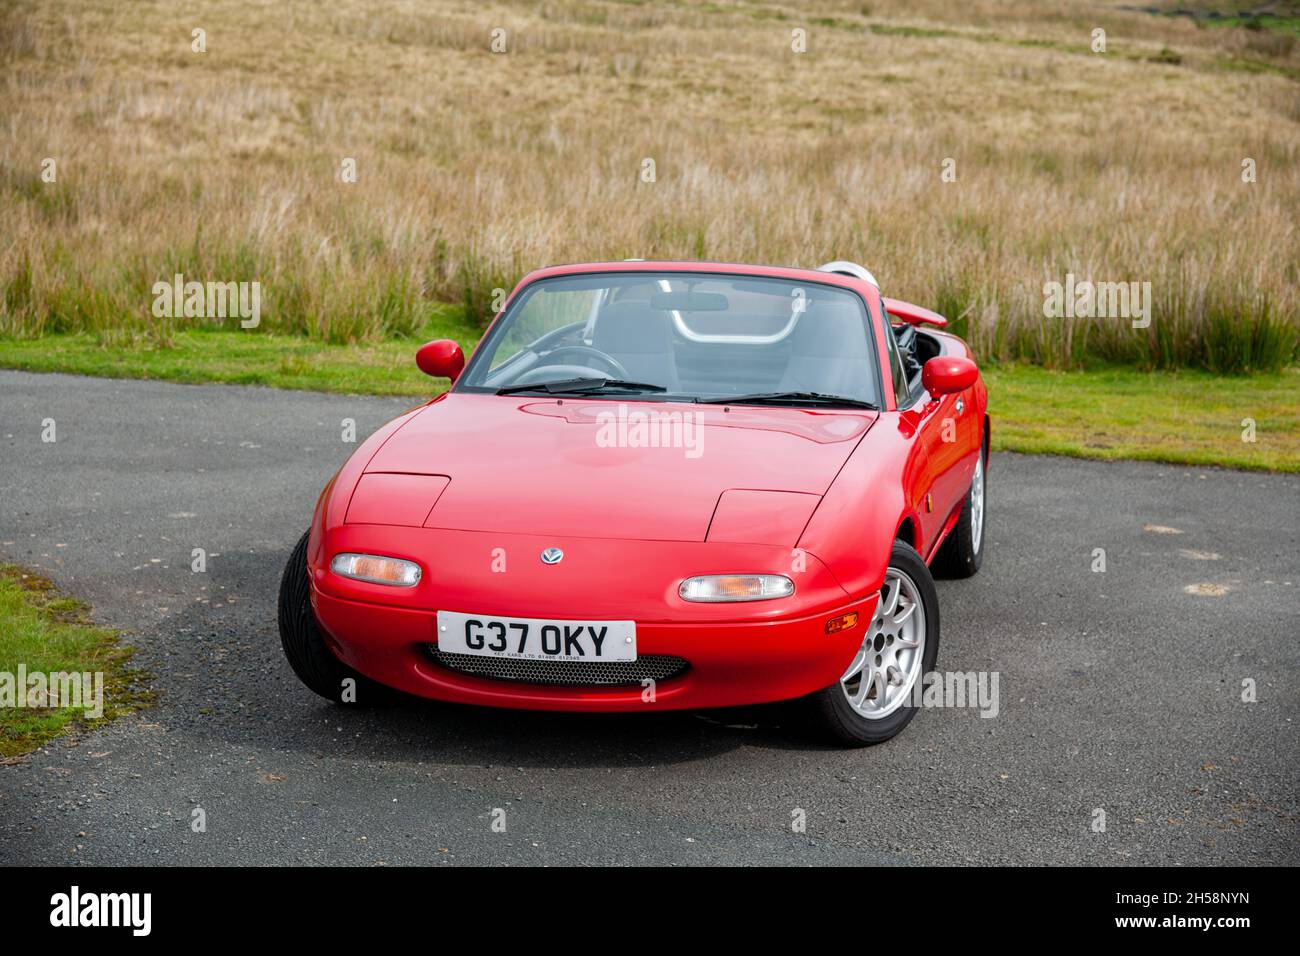 Mazda Eunos MX5 parked on a country lane with fields ...